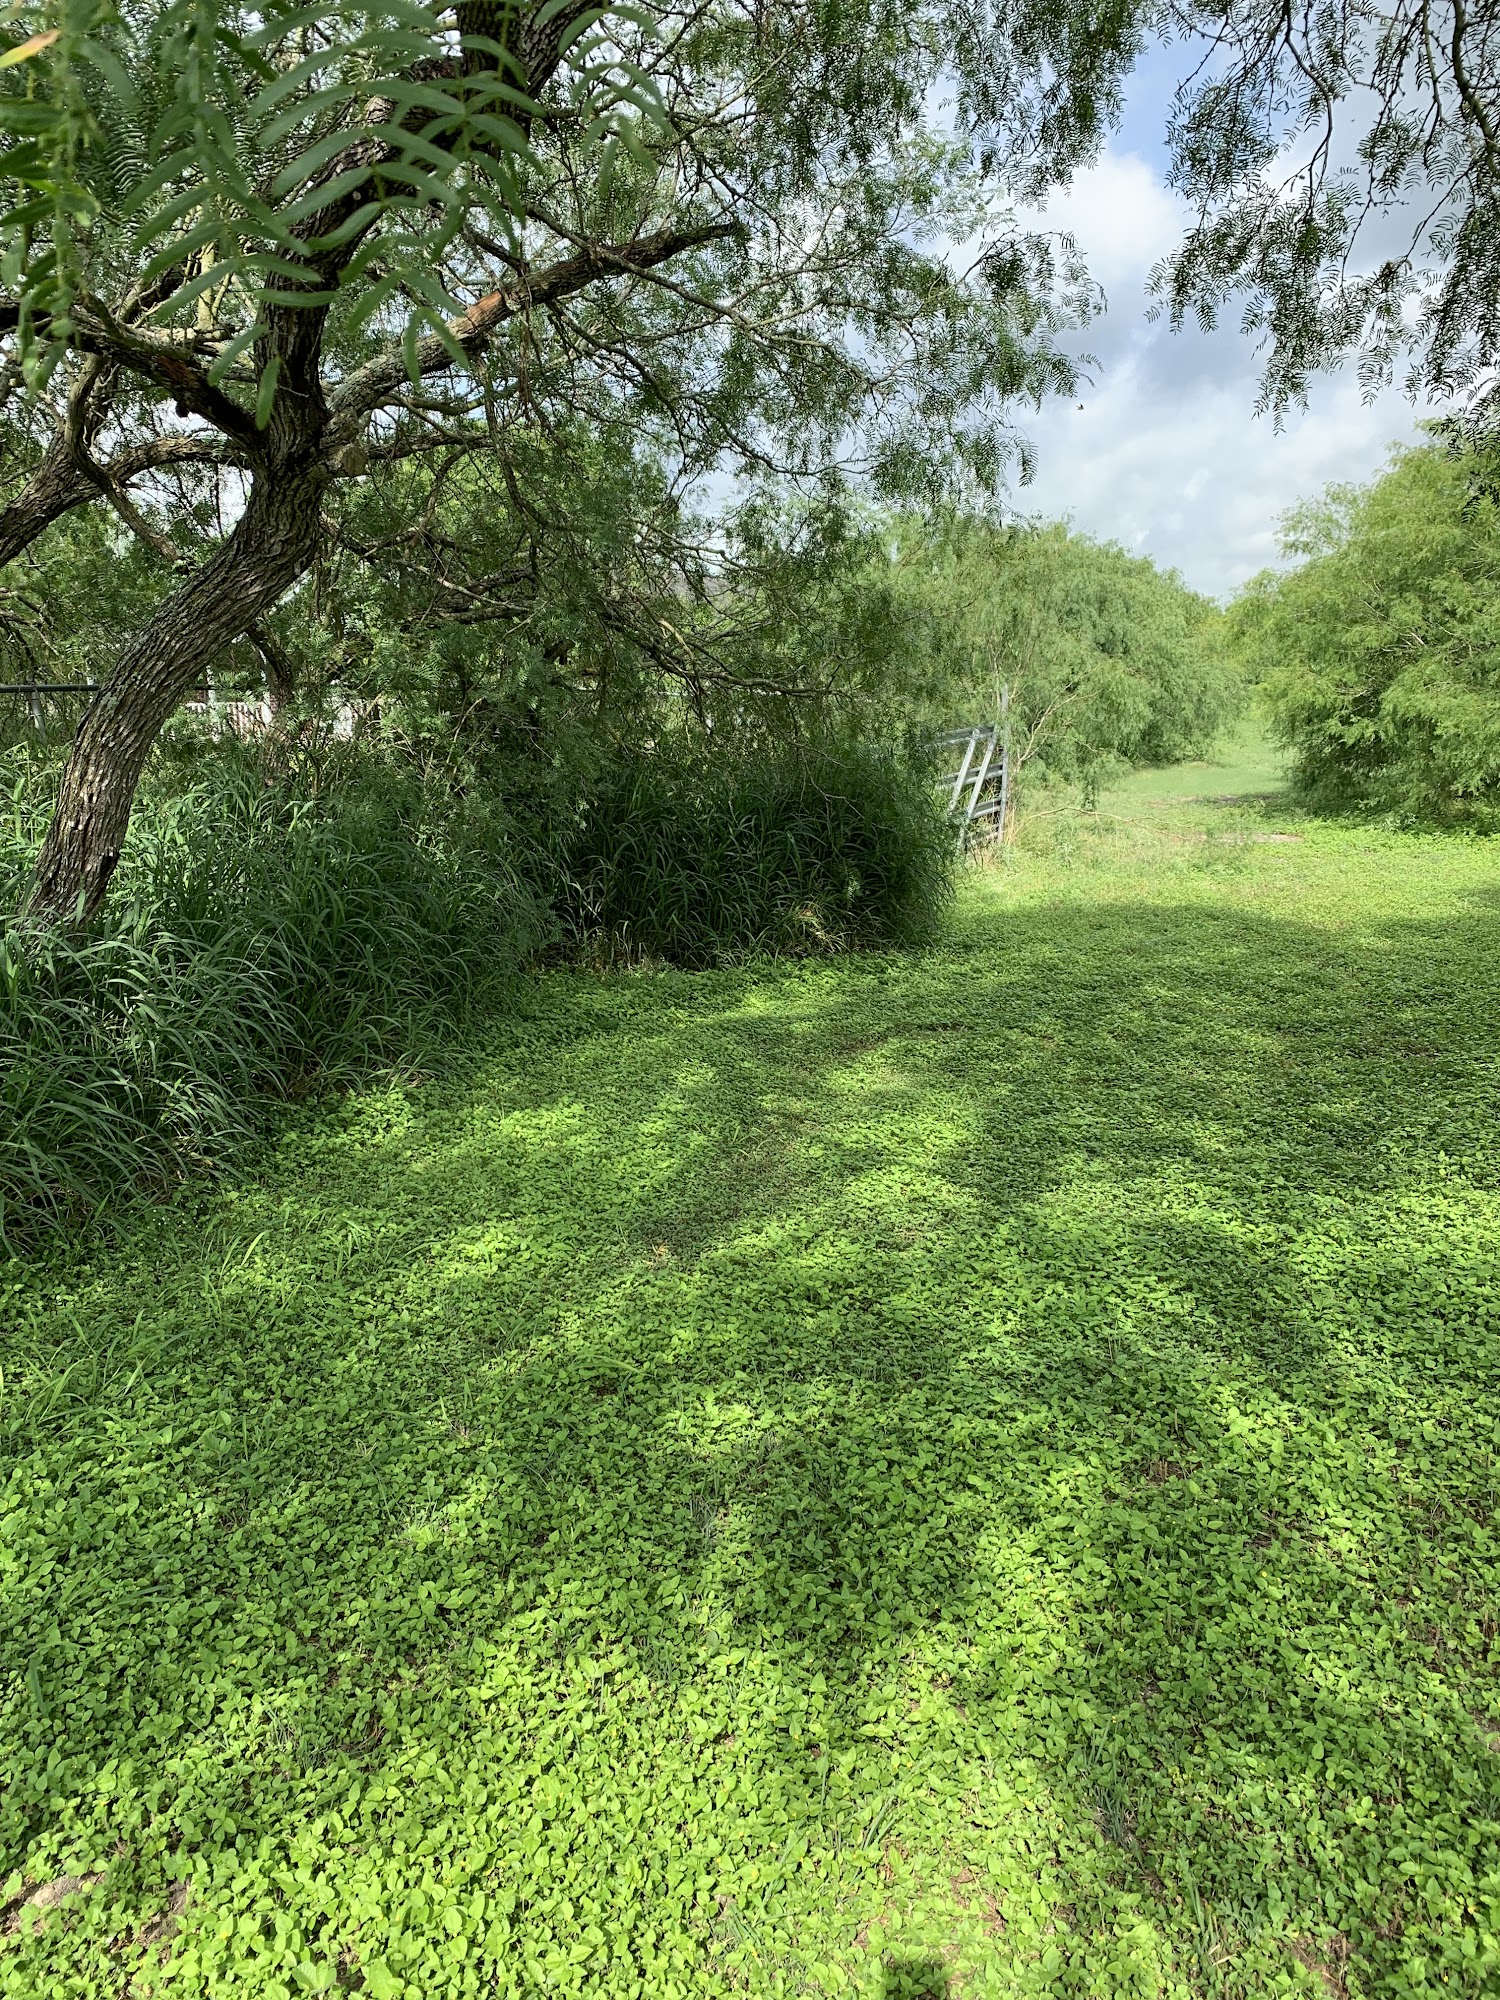 Ralph's Lawn Services - Landscaping Contractor & Lawn Mowing Services 302 W Main St, Bishop Texas 78343